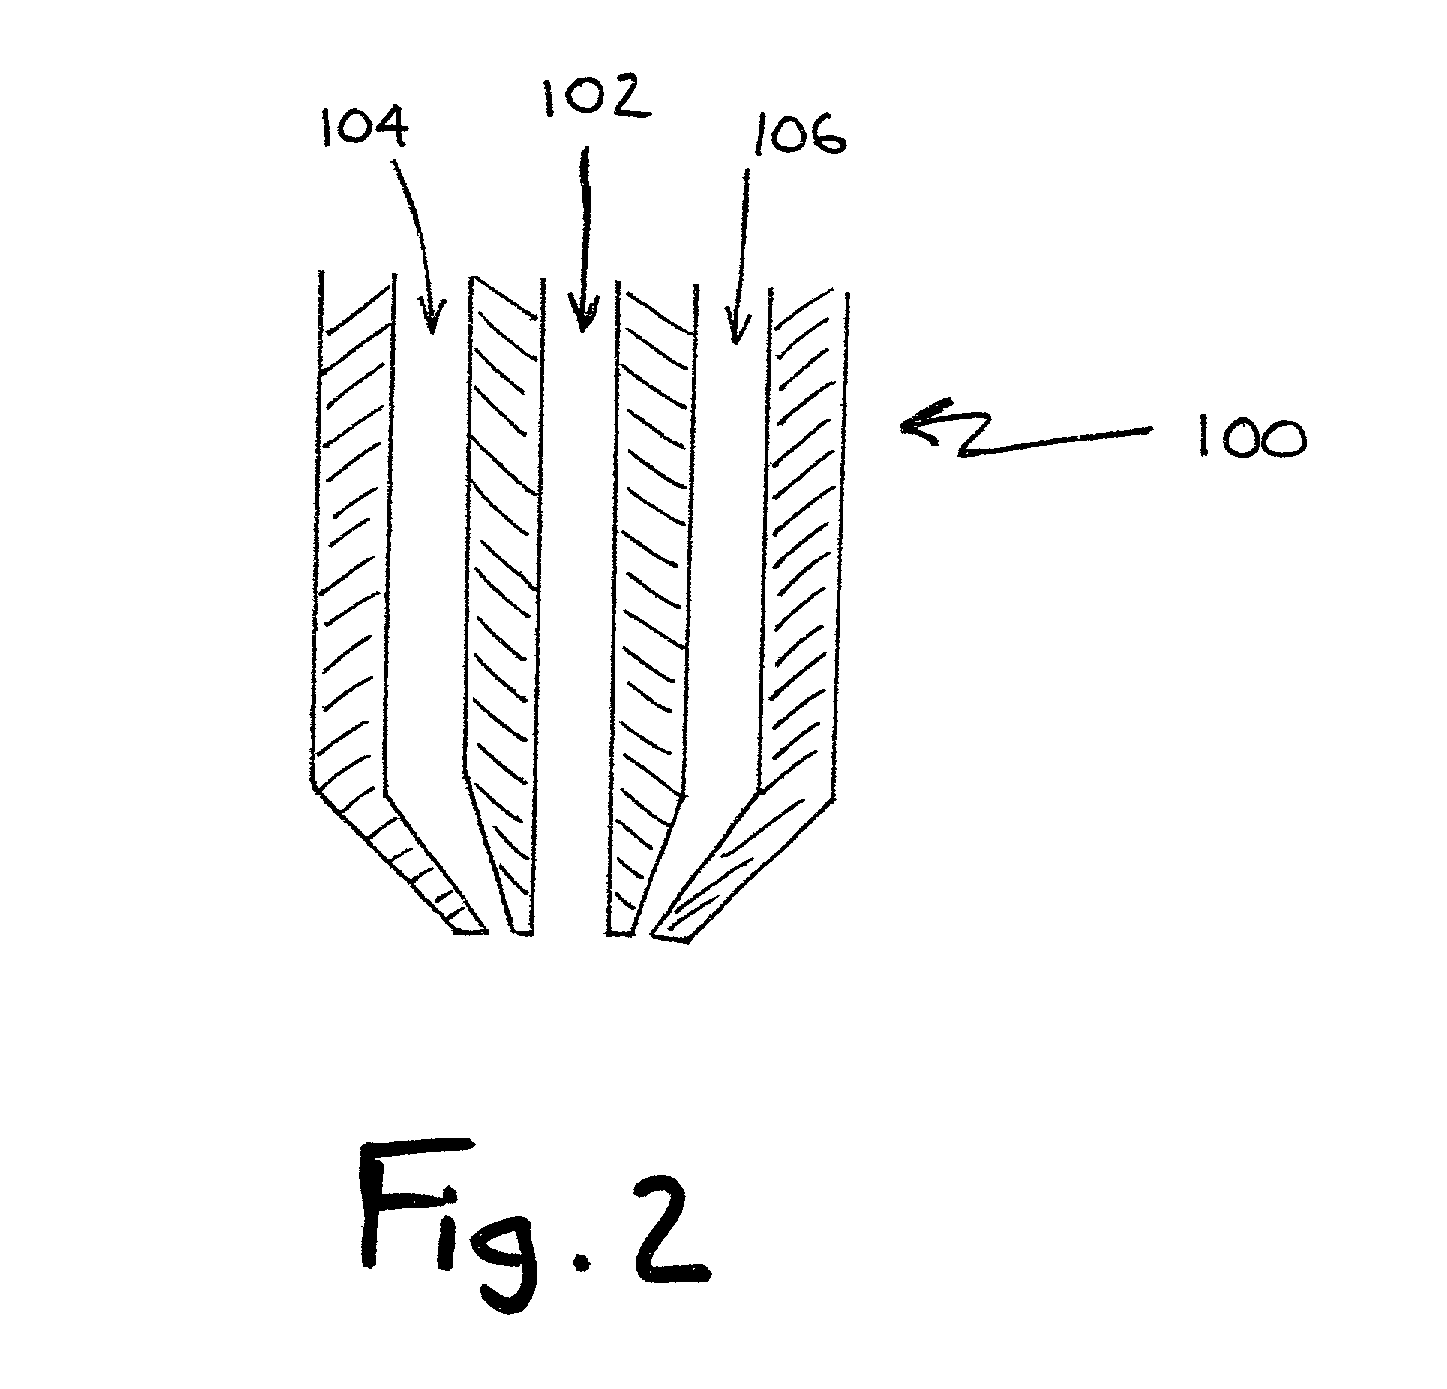 Electrocatalyst powders, methods for producing powders and devices fabricated from same